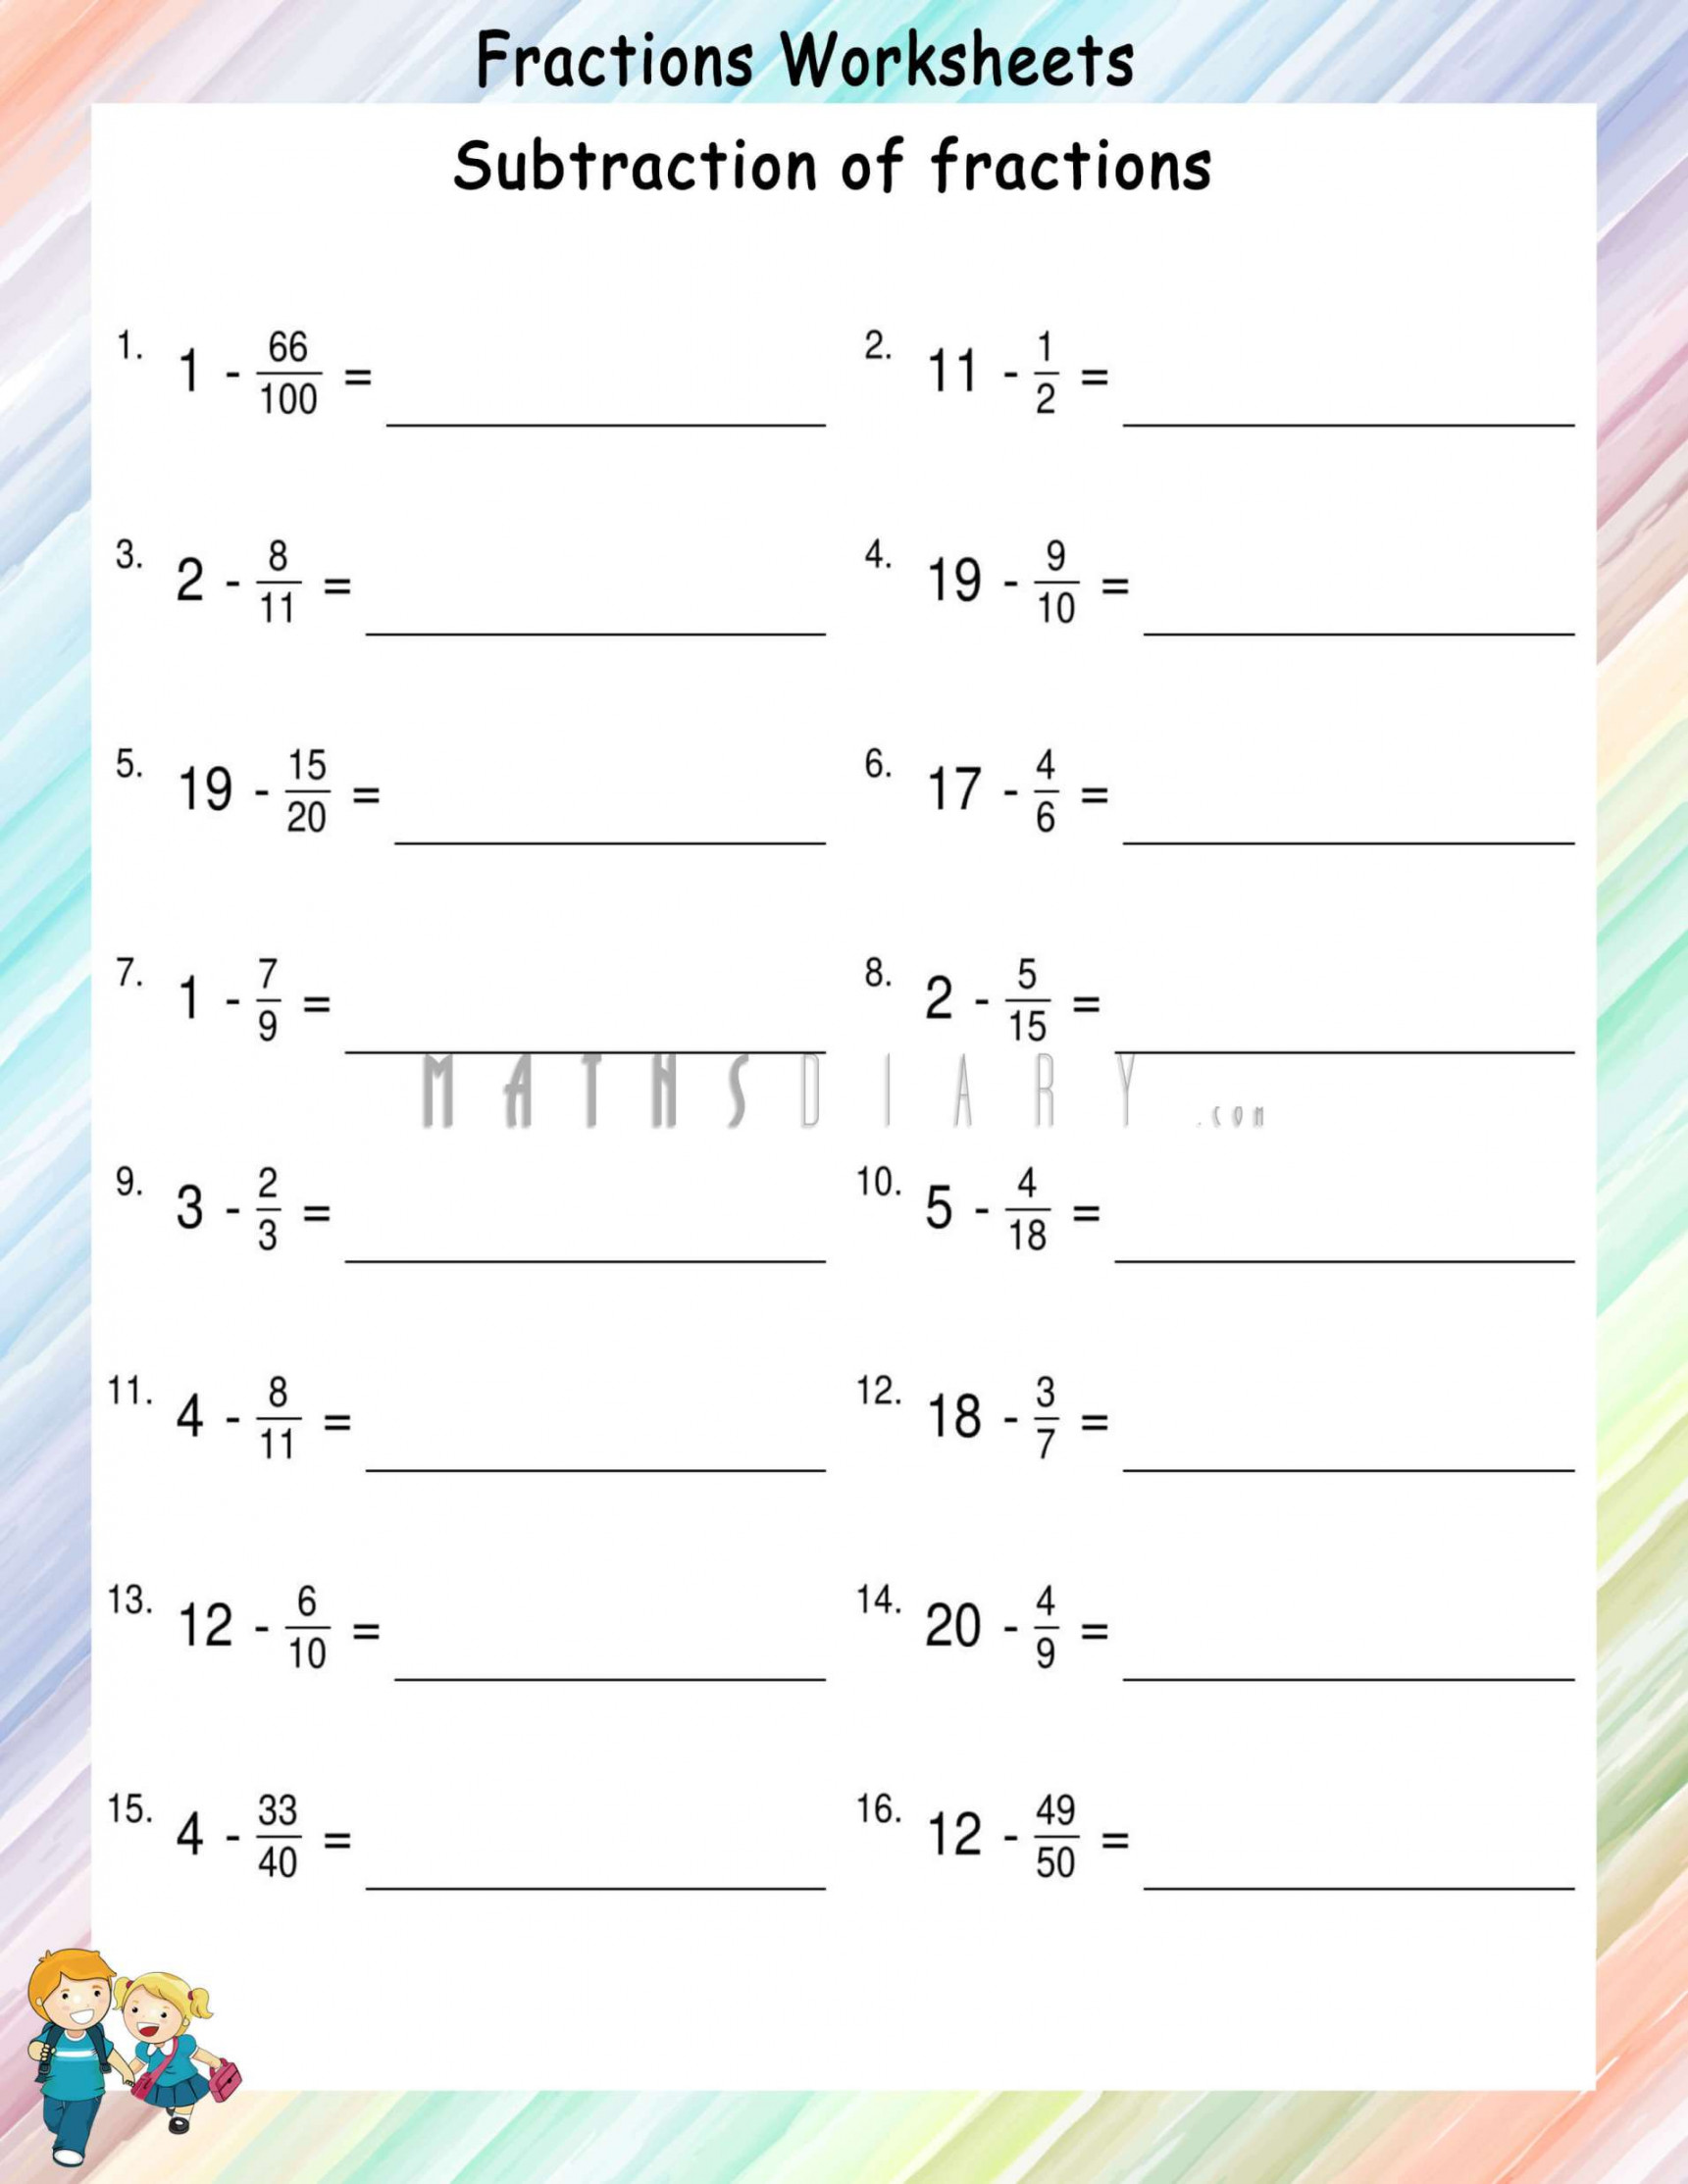 Subtracting fractions from whole numbers - Math Worksheets